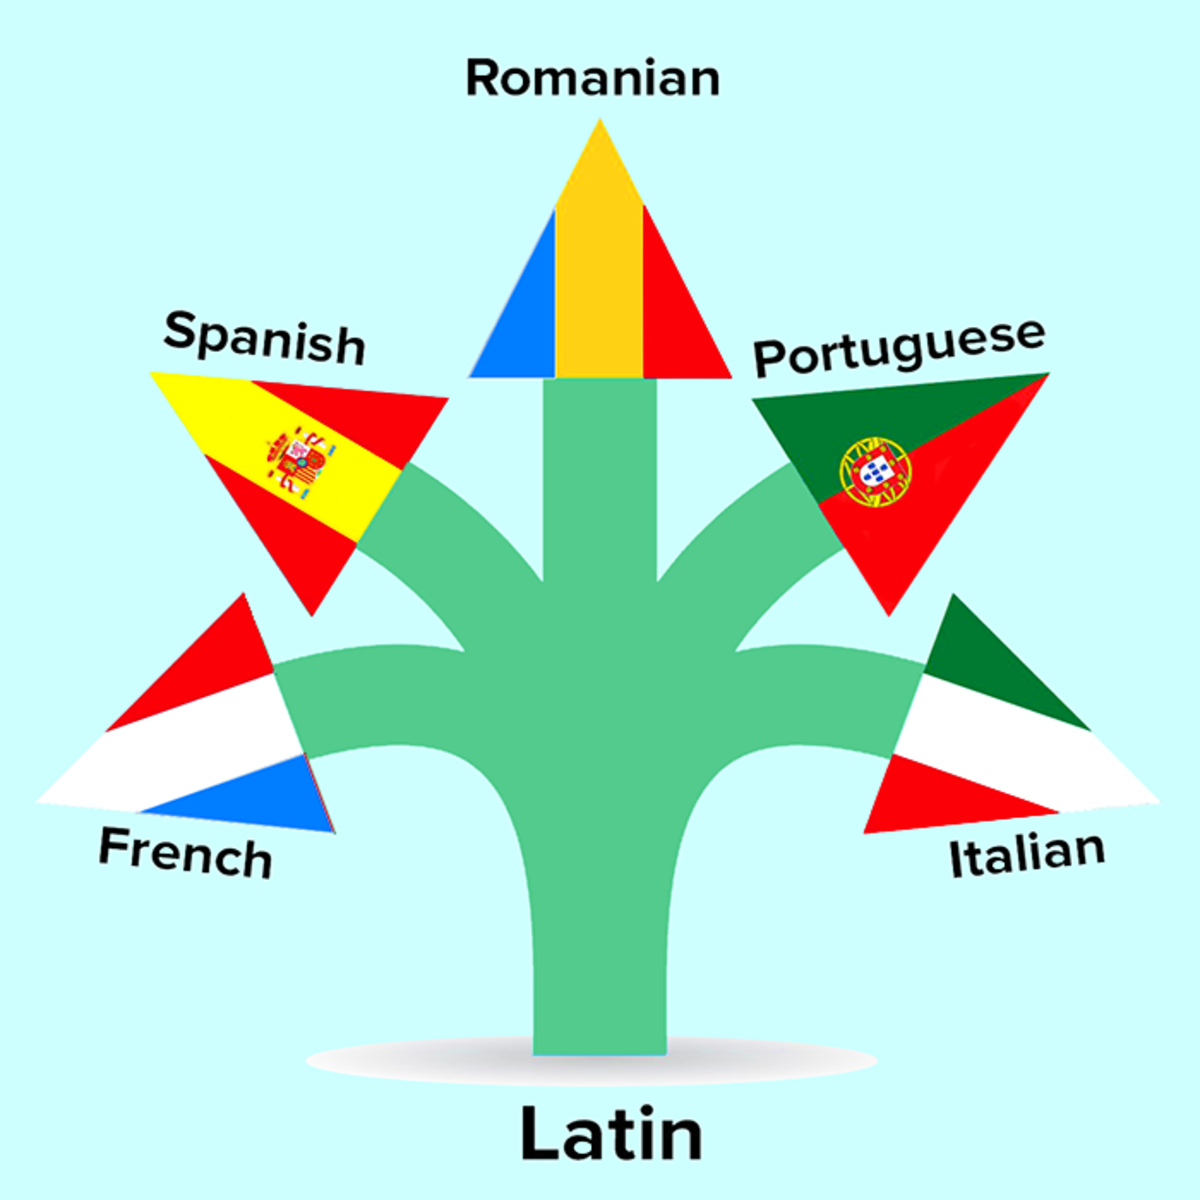 Spanish and Italian are among the Romance languages, which are derived from Latin